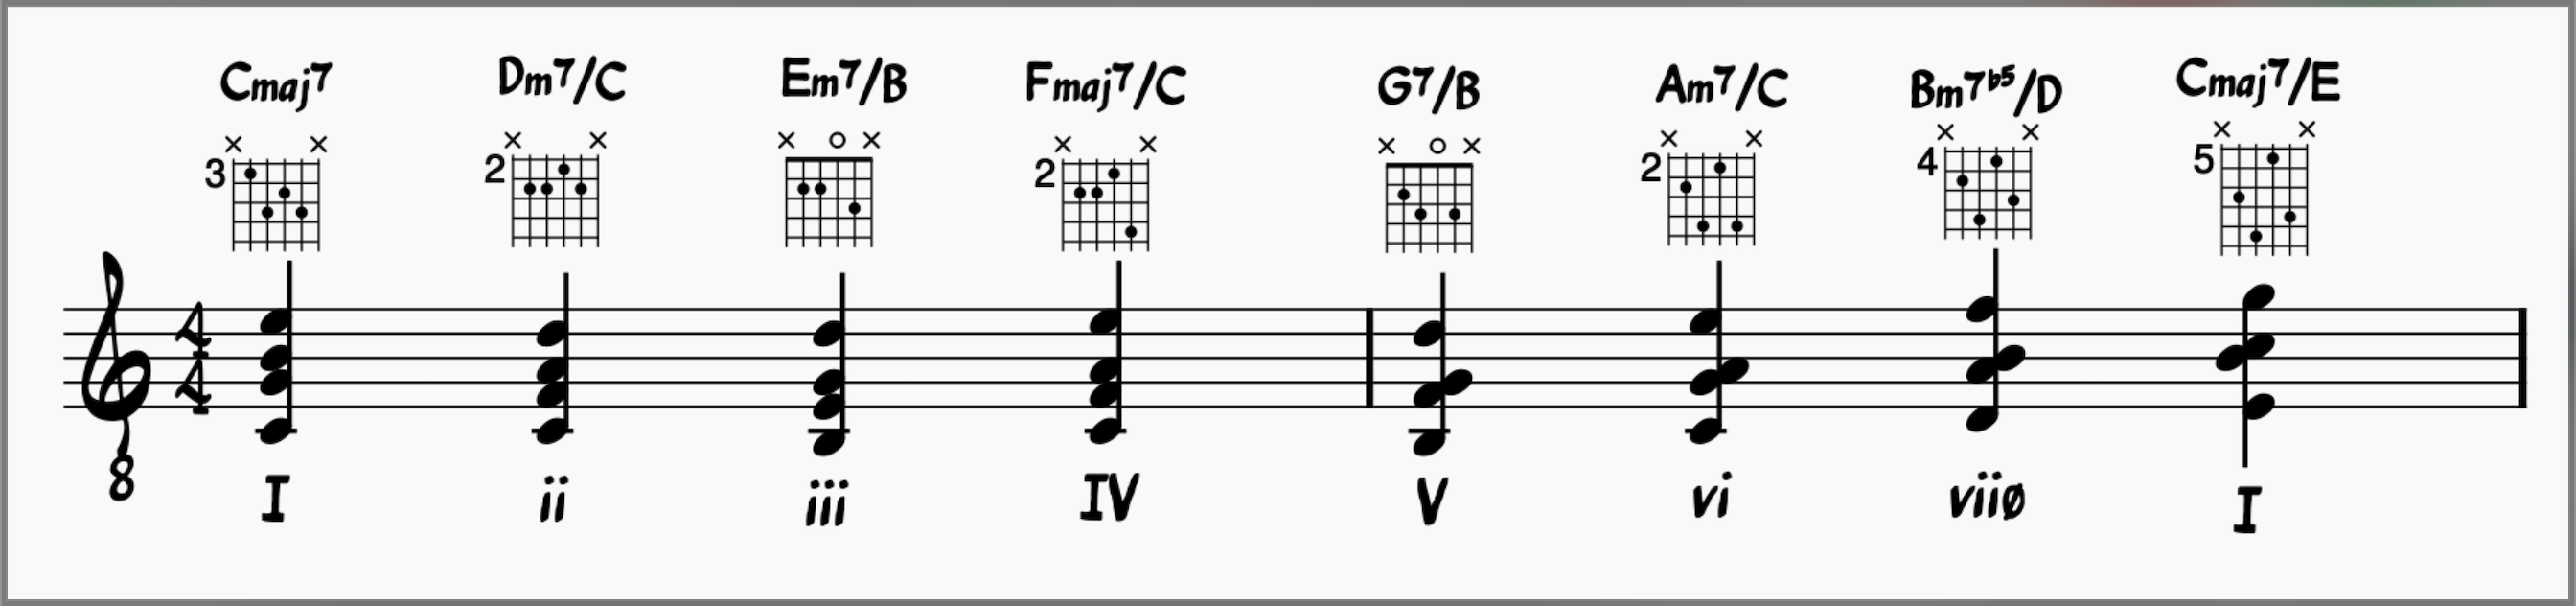 Jazz Guitar: Diatonic 7th chords in the Key of C major using inversions.